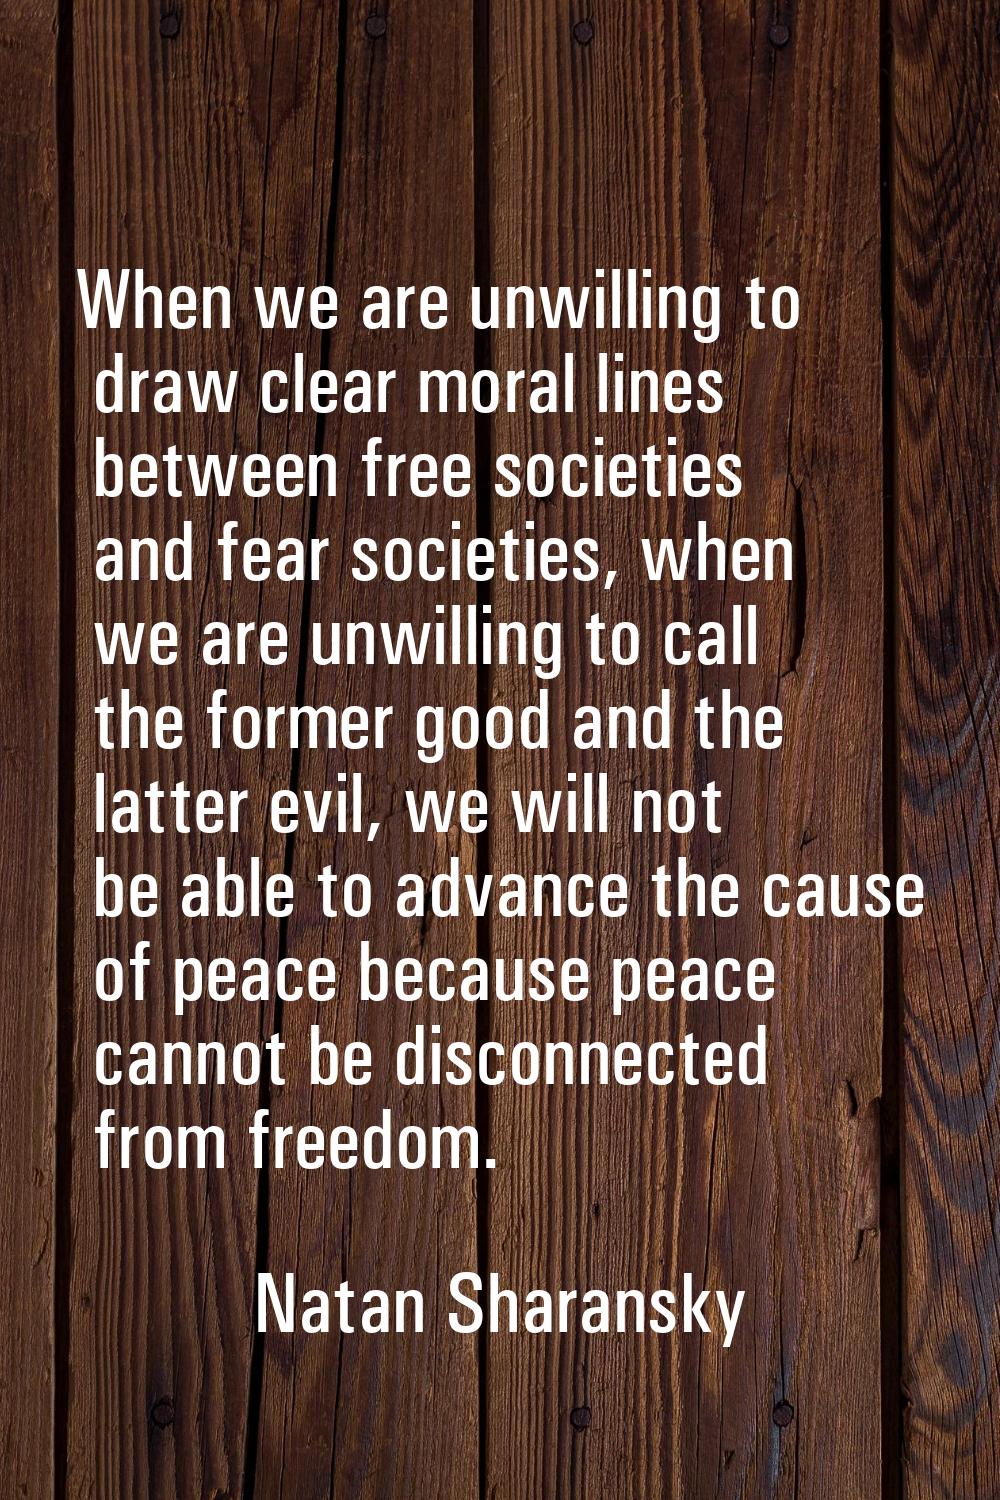 When we are unwilling to draw clear moral lines between free societies and fear societies, when we 